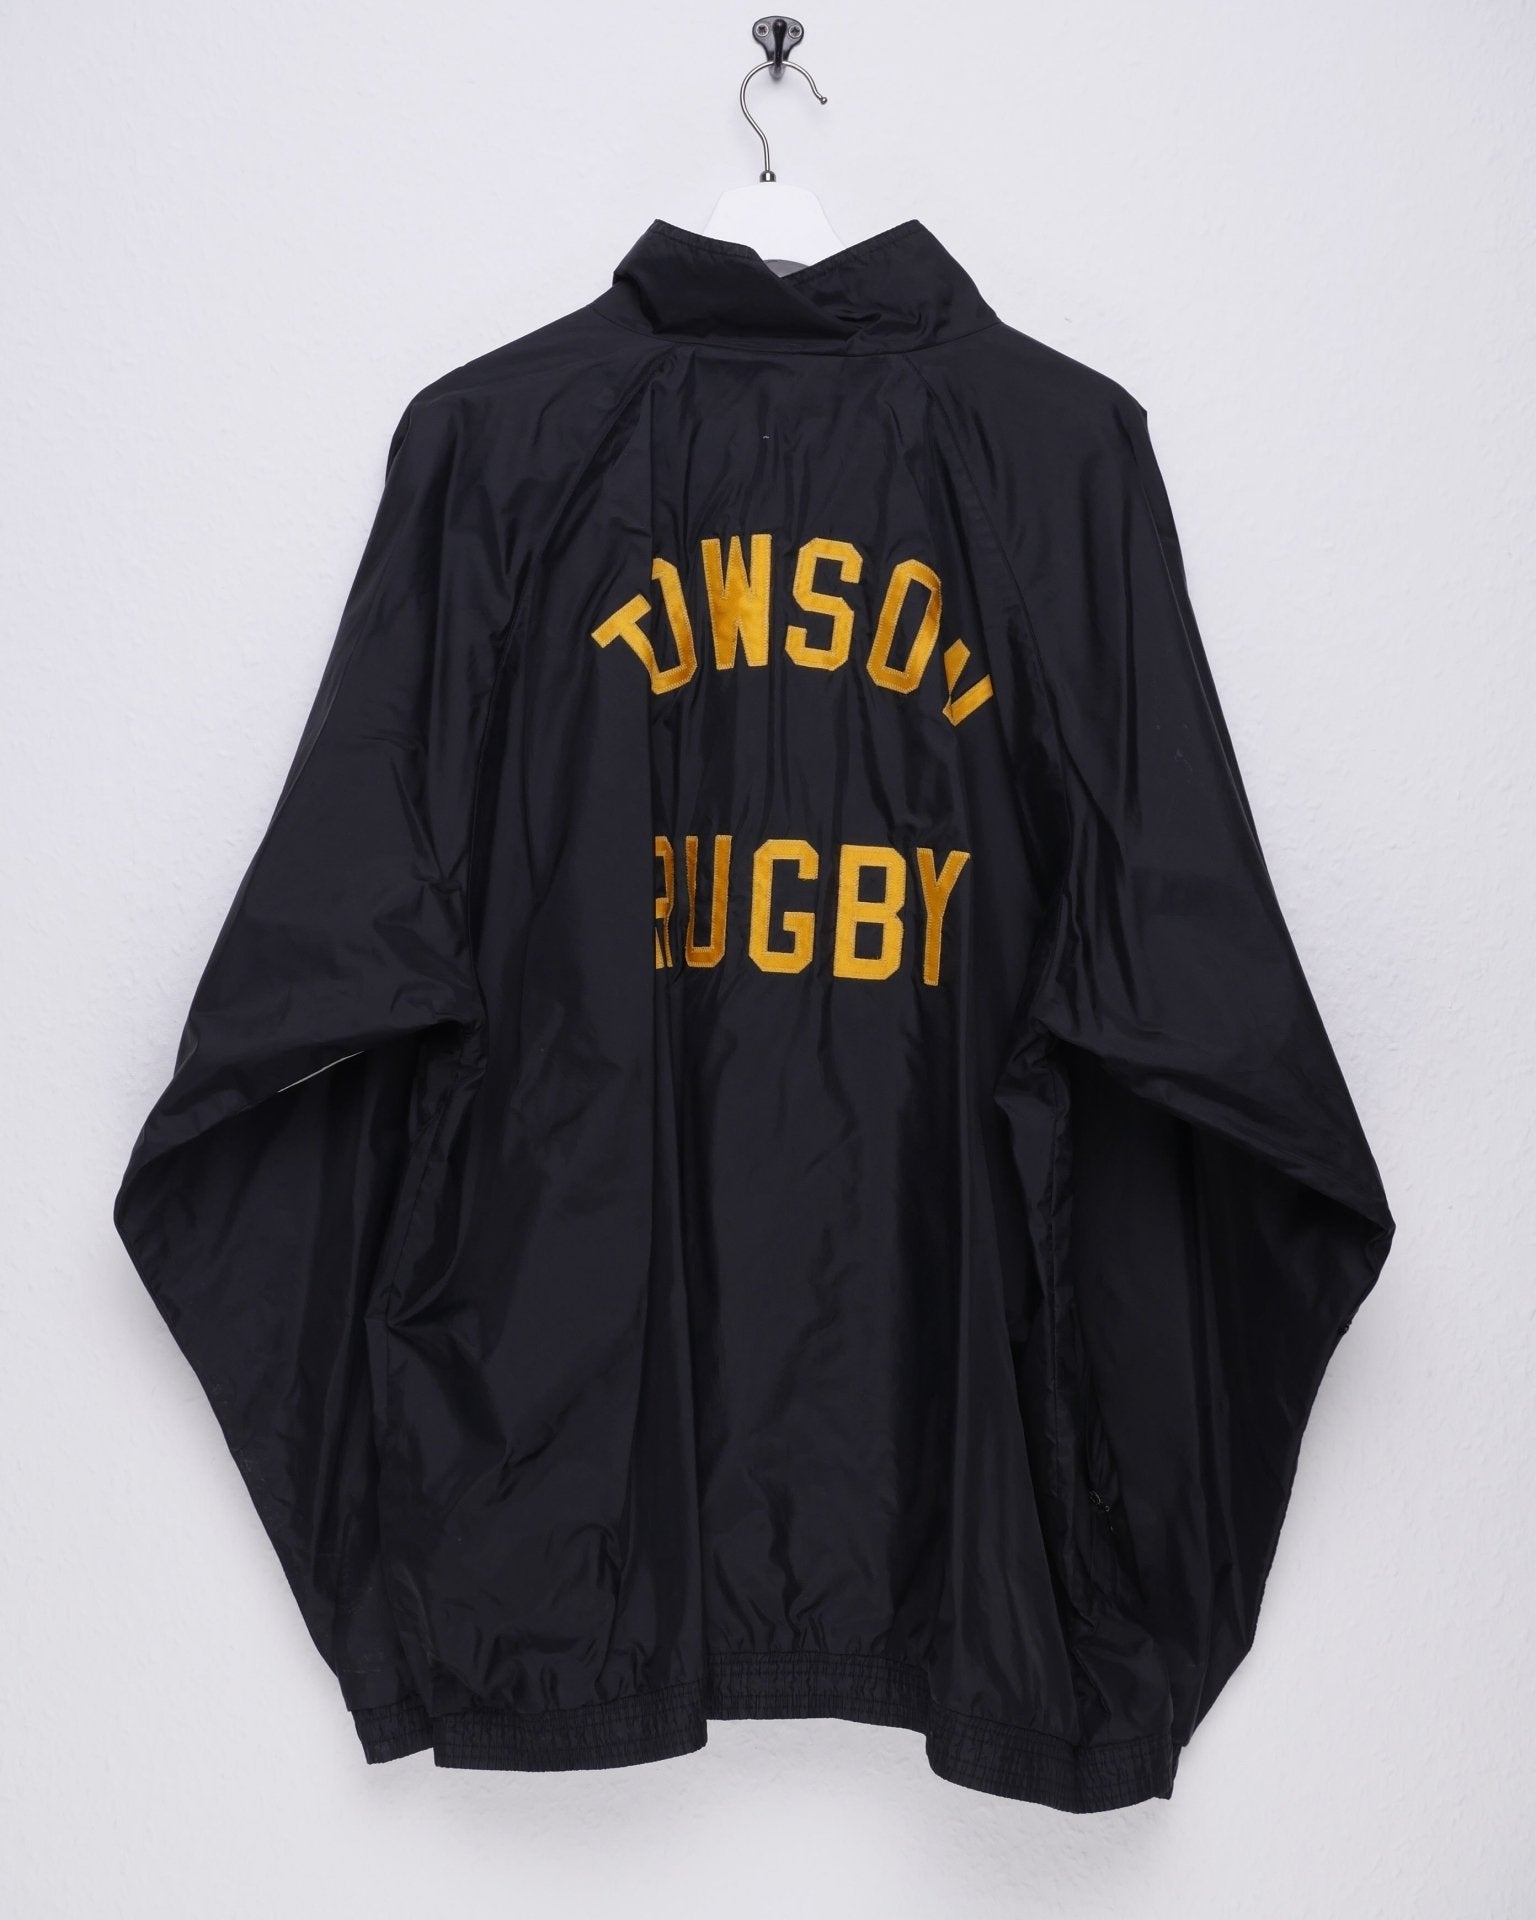 adidas embroidered Logo 'Towson University Rugby' two toned Track Jacket - Peeces